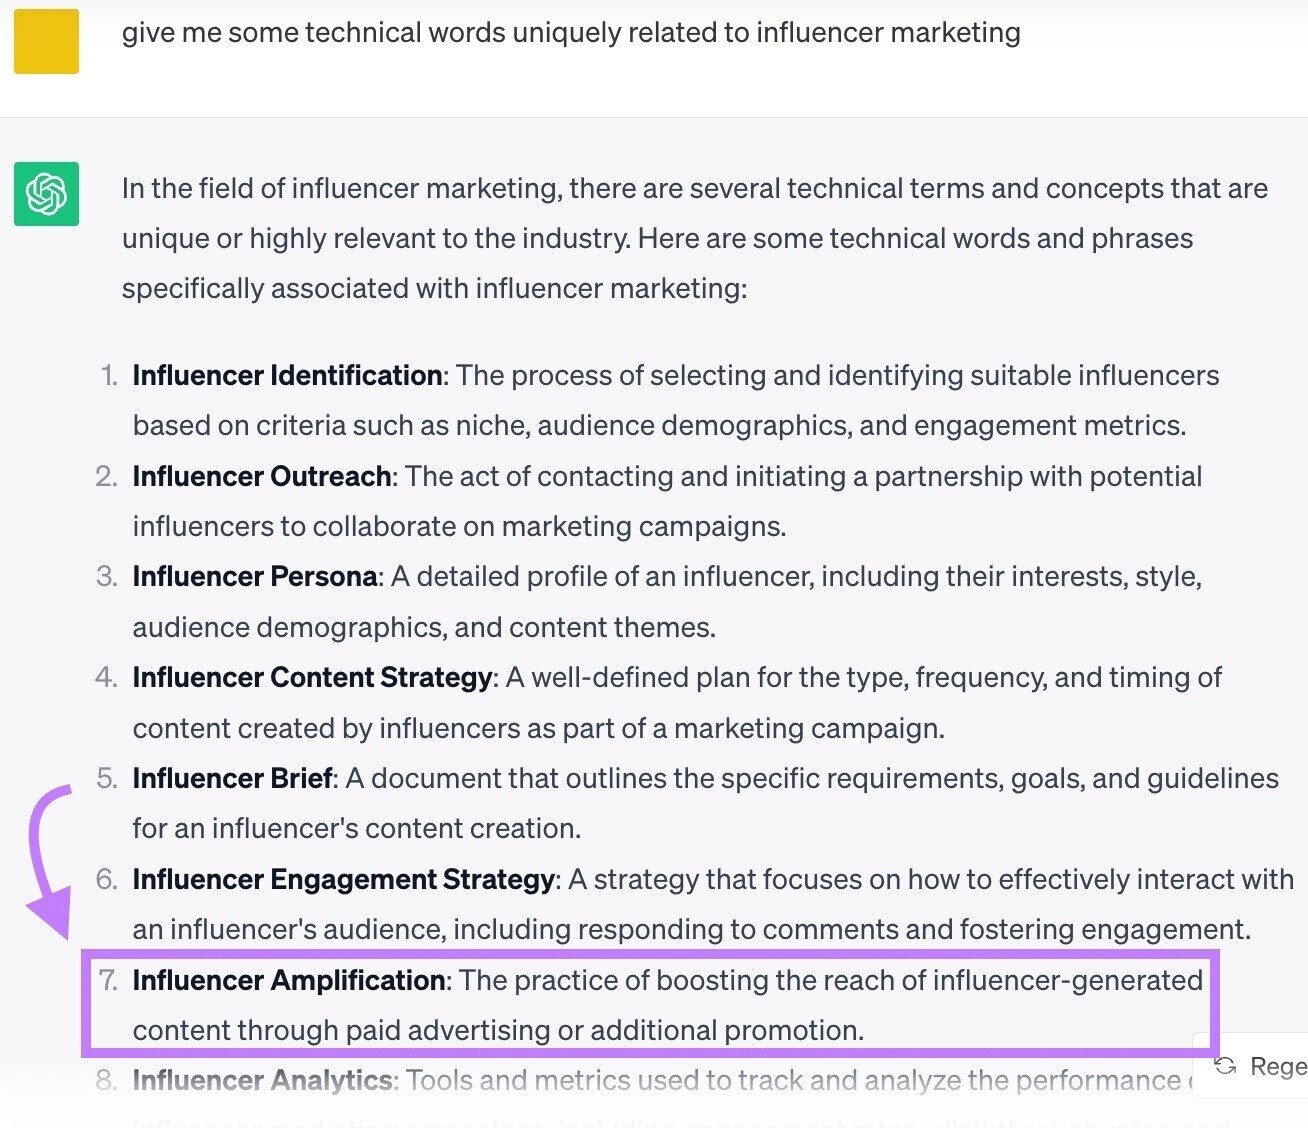 ChatGPT response to “Give me some technical words uniquely related to influencer marketing” prompt